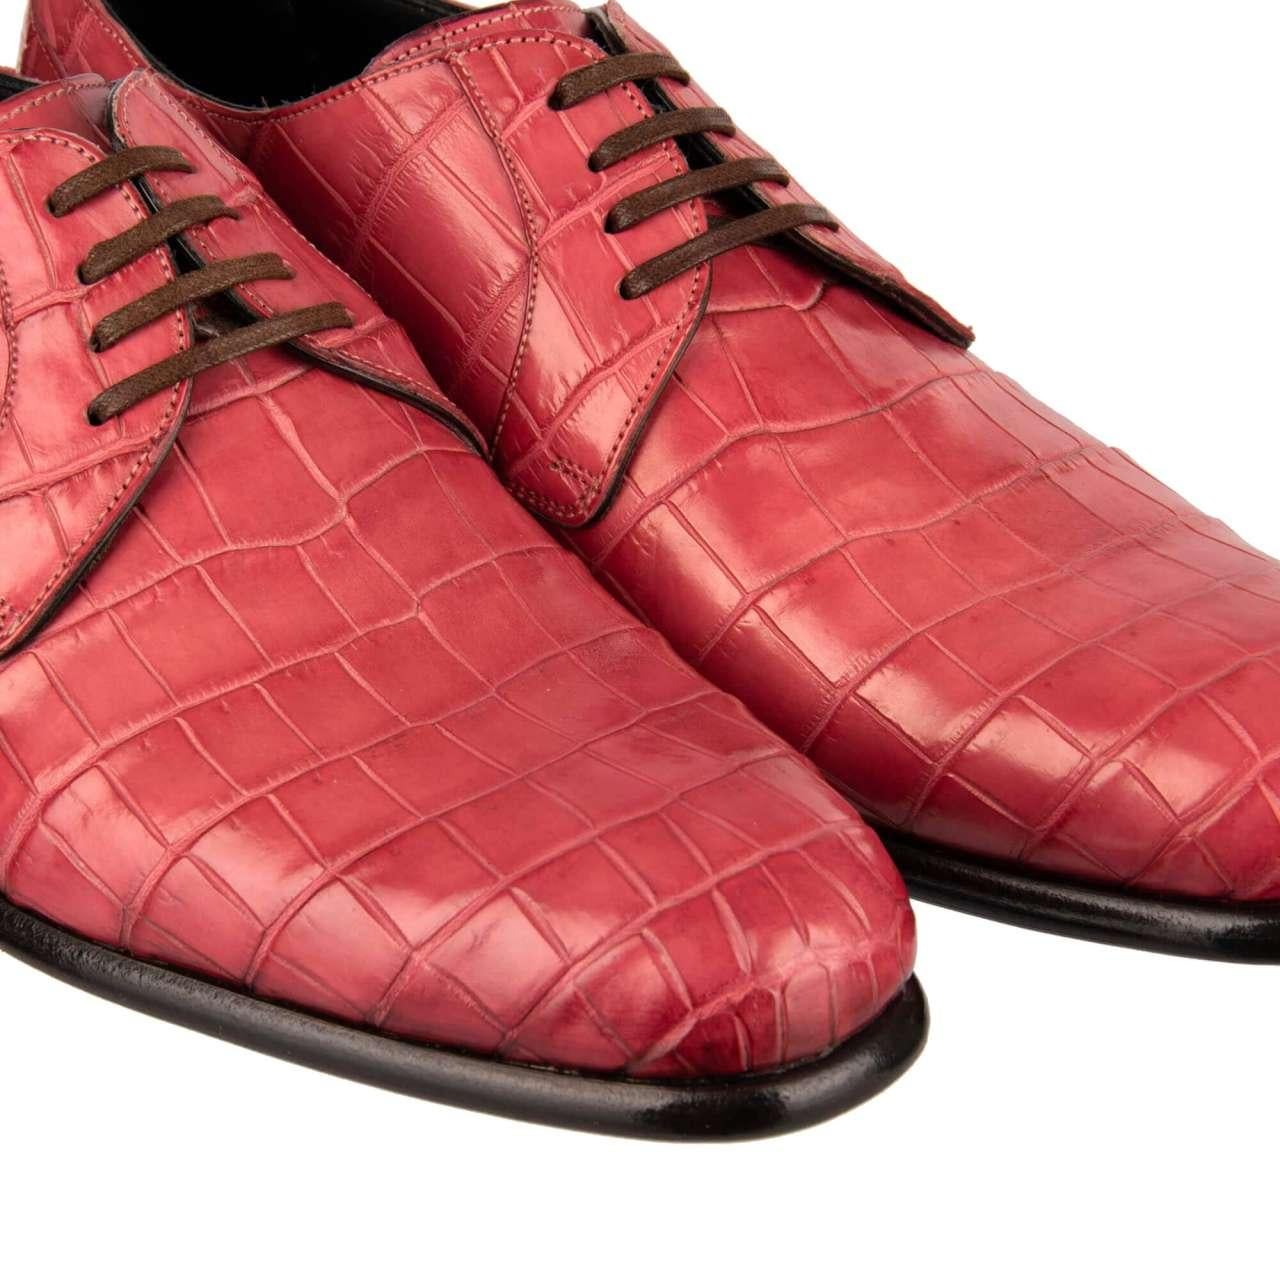 Dolce & Gabbana Crocodile Leather Derby Shoes SIENA Pink EUR 40 For Sale 1